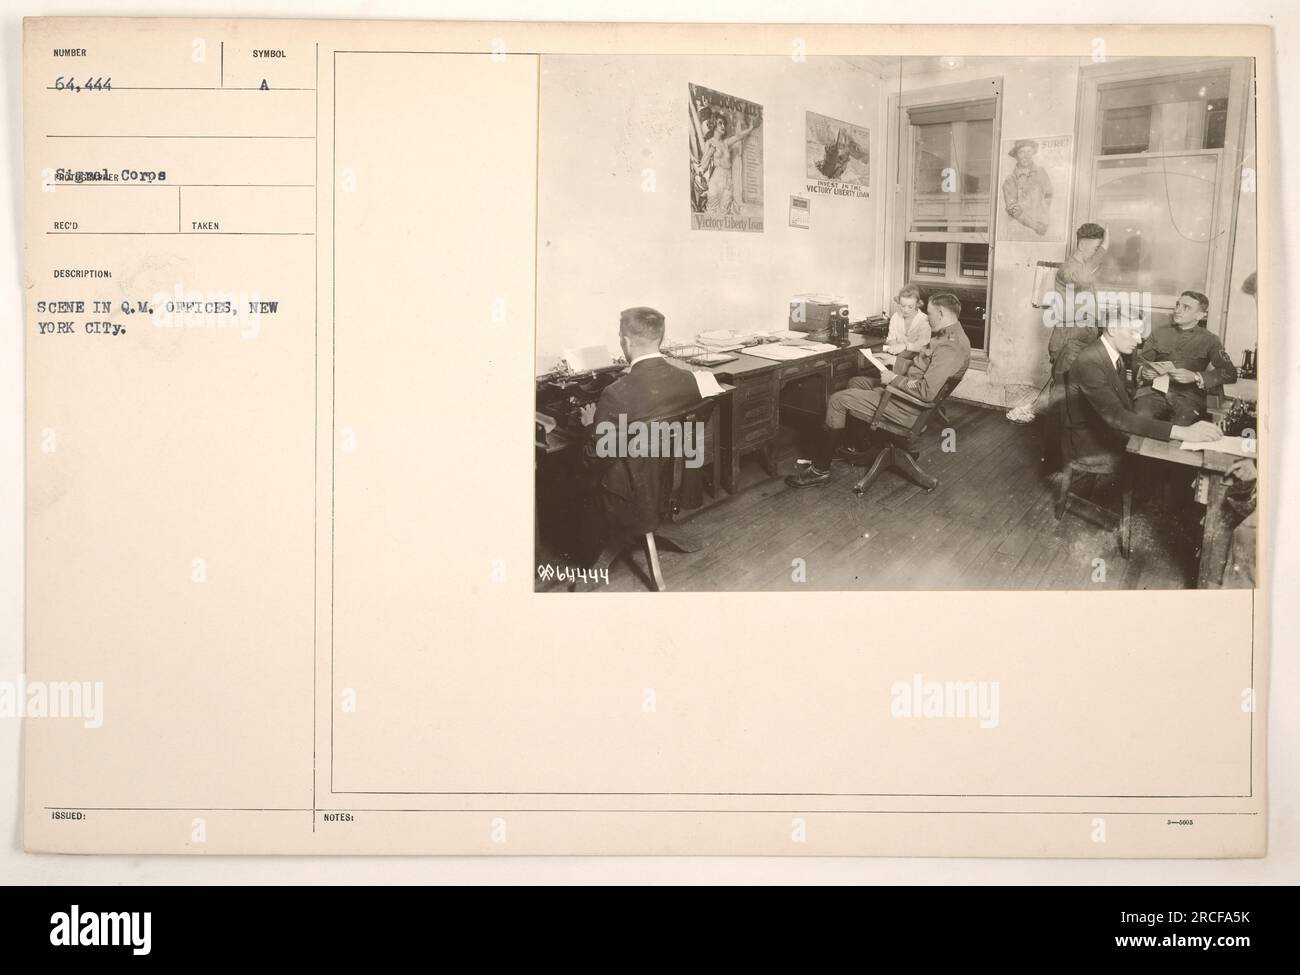 A photo depicting a scene at the Quarter Master (Q.M.) offices in New York City. It is numbered 64,444 and was taken to document American military activities during World War One. The photo captures the environment of the Q.M. offices, showing personnel engaged in their work. Stock Photo